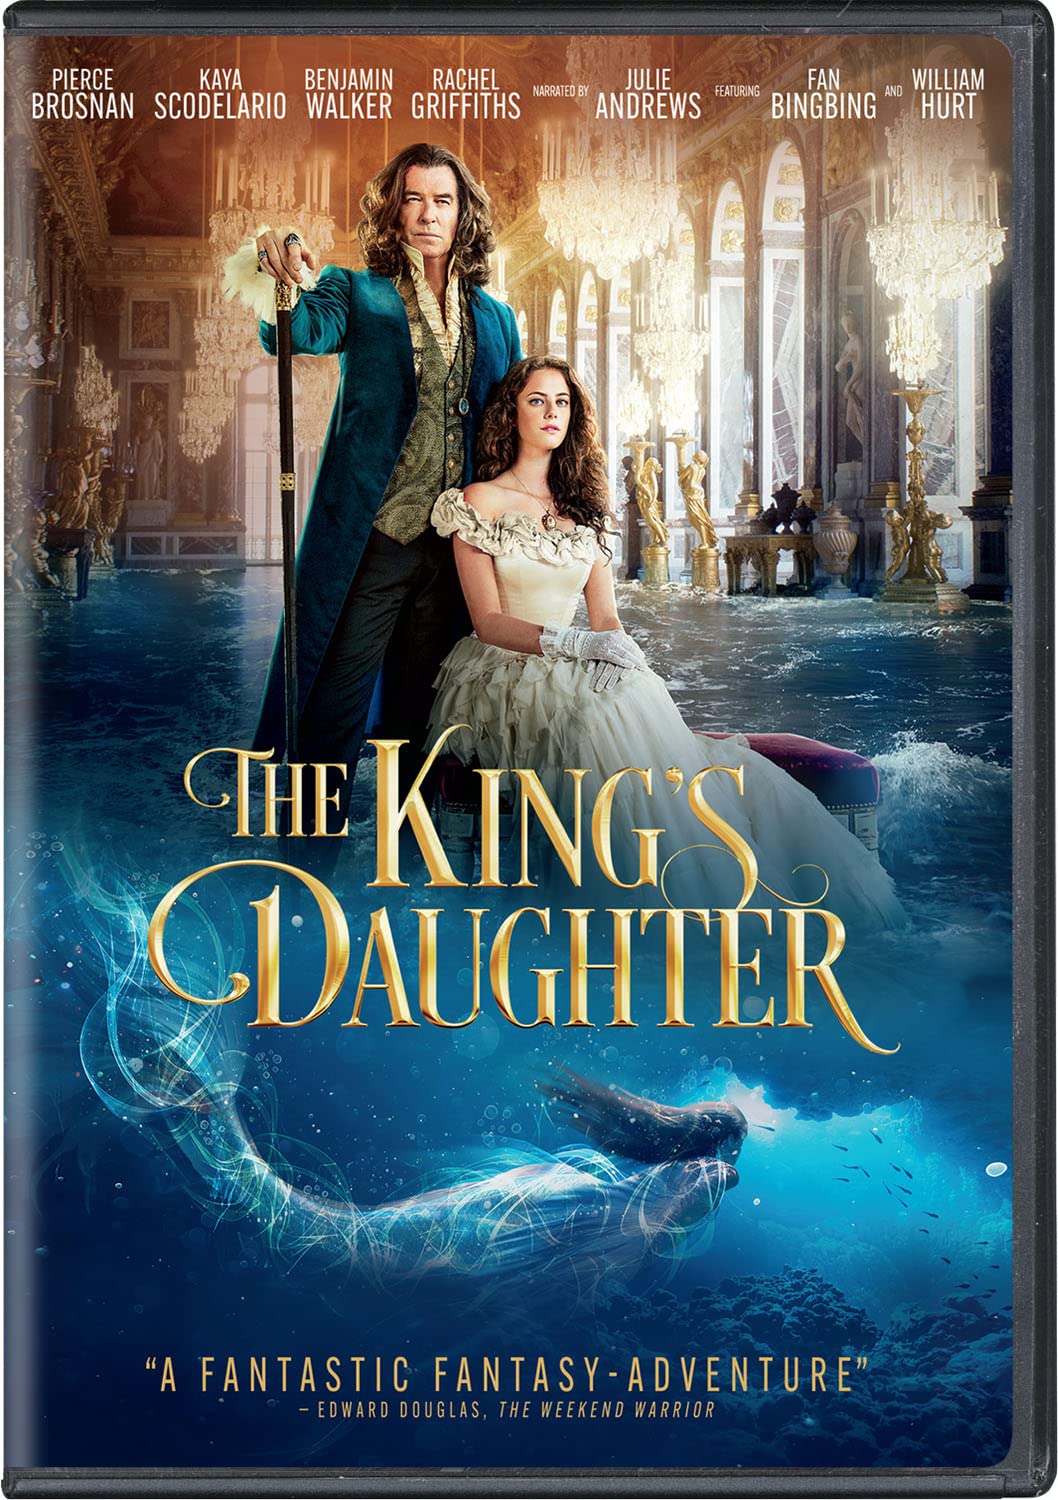 Image for "The King's Daughter"